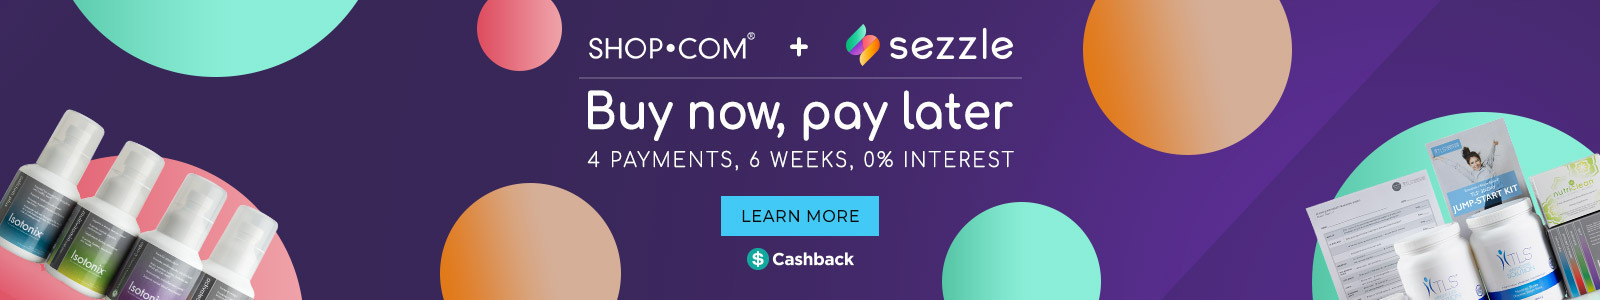 SHOP.COM | Sezzle Buy now, pay later 4 payments, 6 weeks, 0% interest Learn More